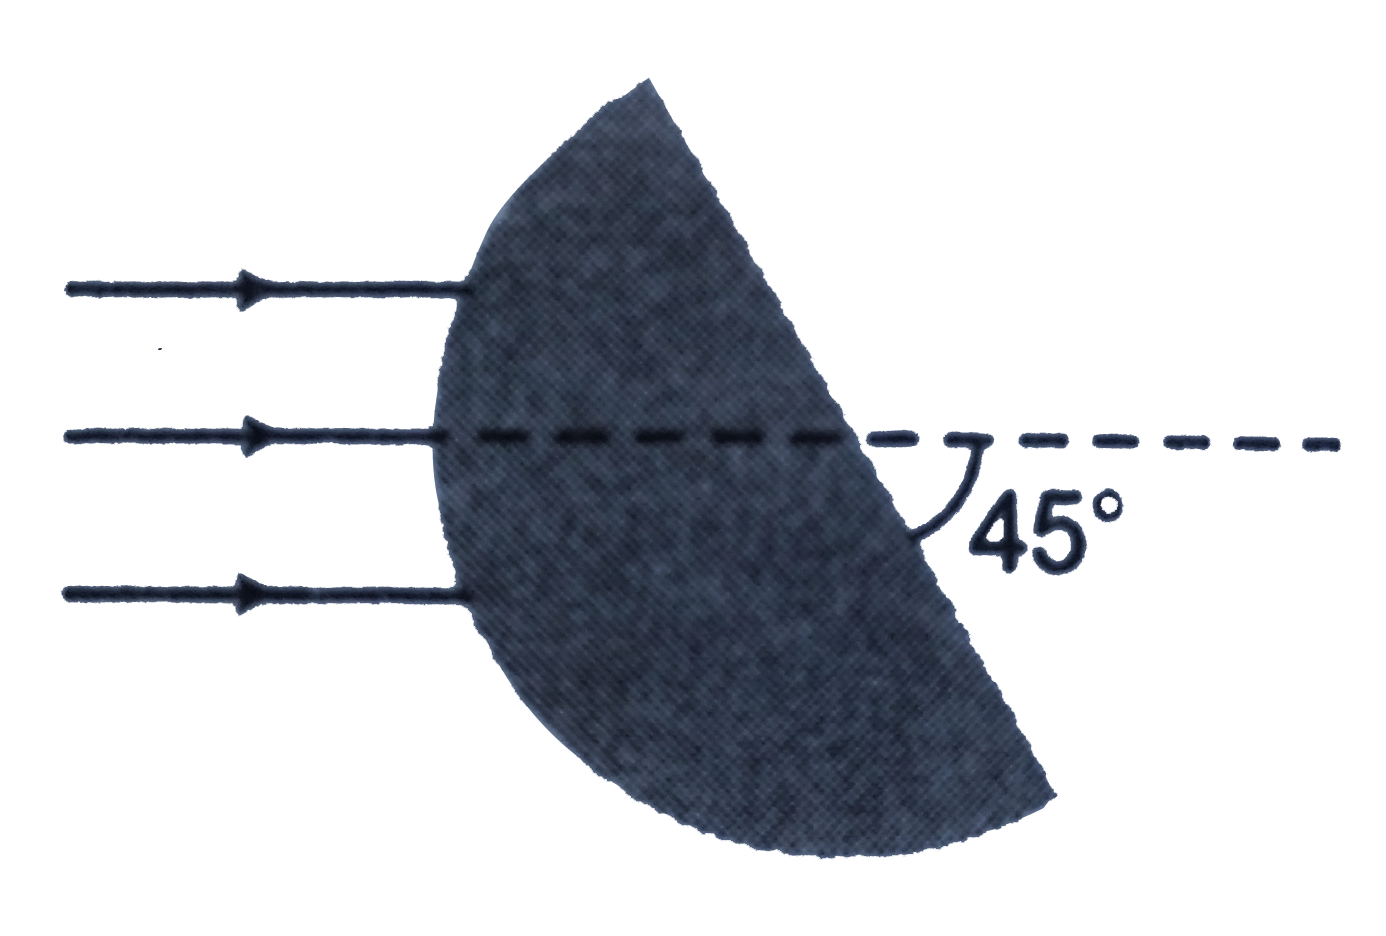 A parallel narrow beam of light is incident on the surface of a transparent hemisphere of radius R and refractive index mu=1.5 as shown. The position of the image formed by refraction at the image formed by refraction at the spherical surface only as